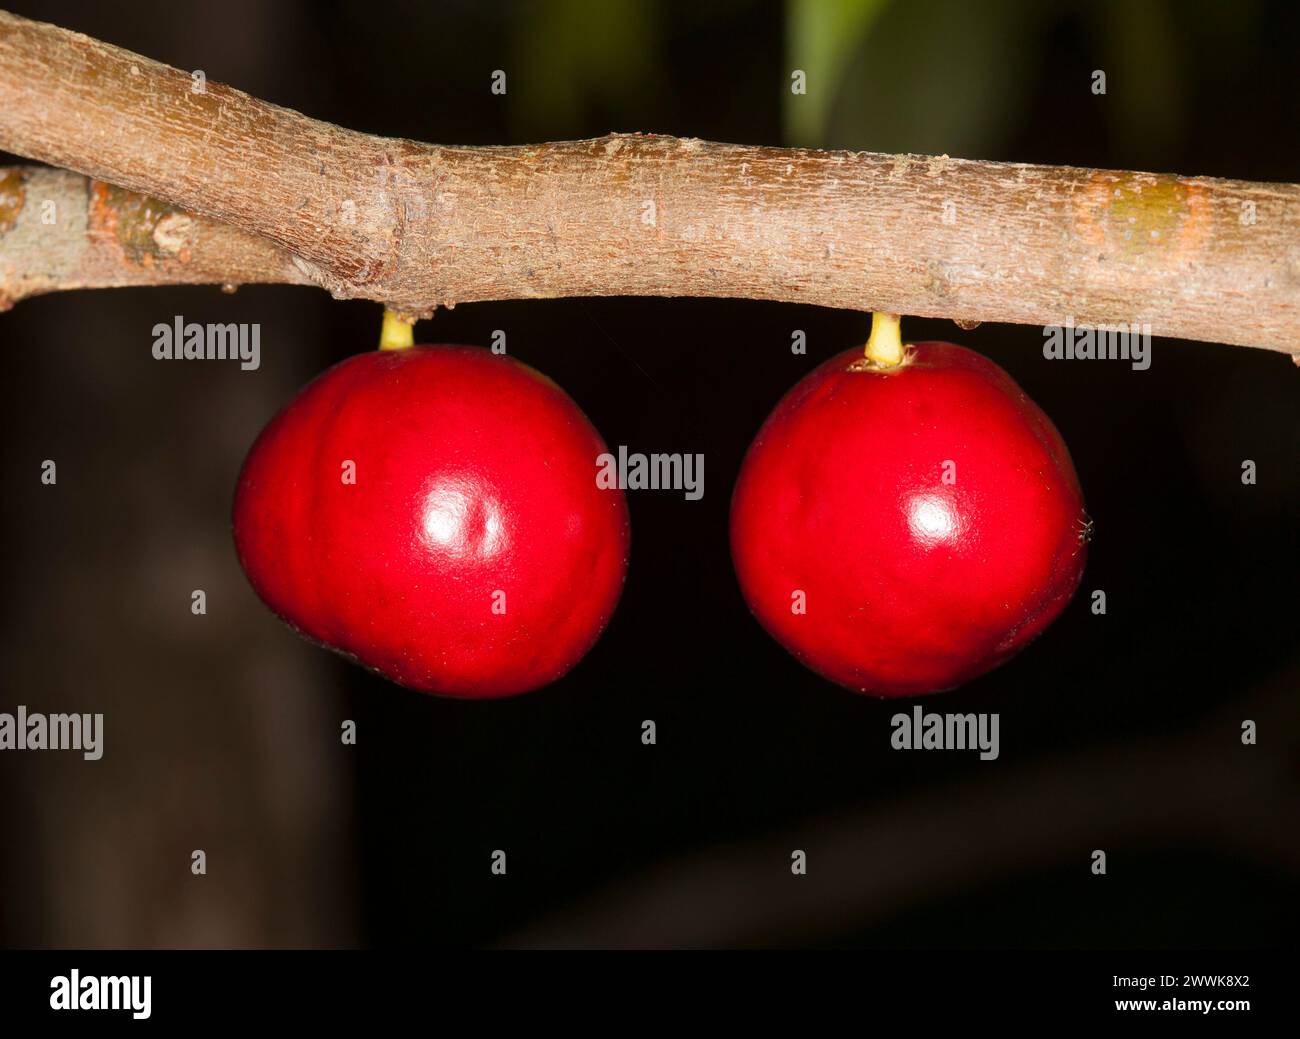 Ripe red fruit of Phaleria clerodendron, an Australian native tree known as Cassawary Plum, against a dark background Stock Photo